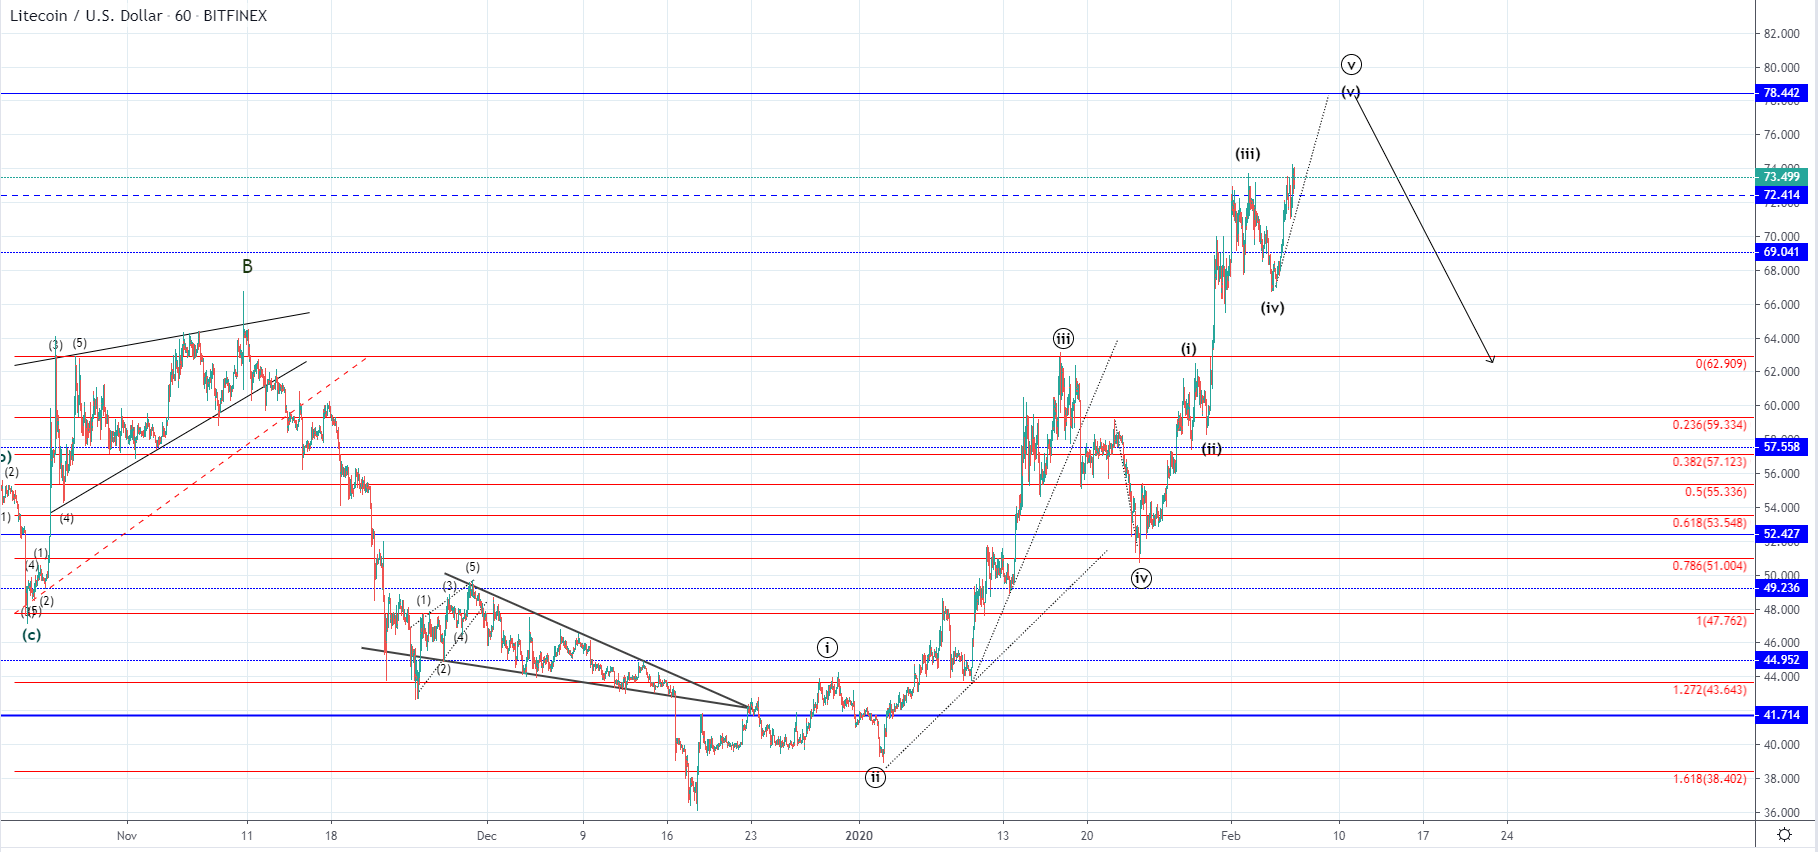 LTC/USD and EOS/USD - Further increase expected but not for long